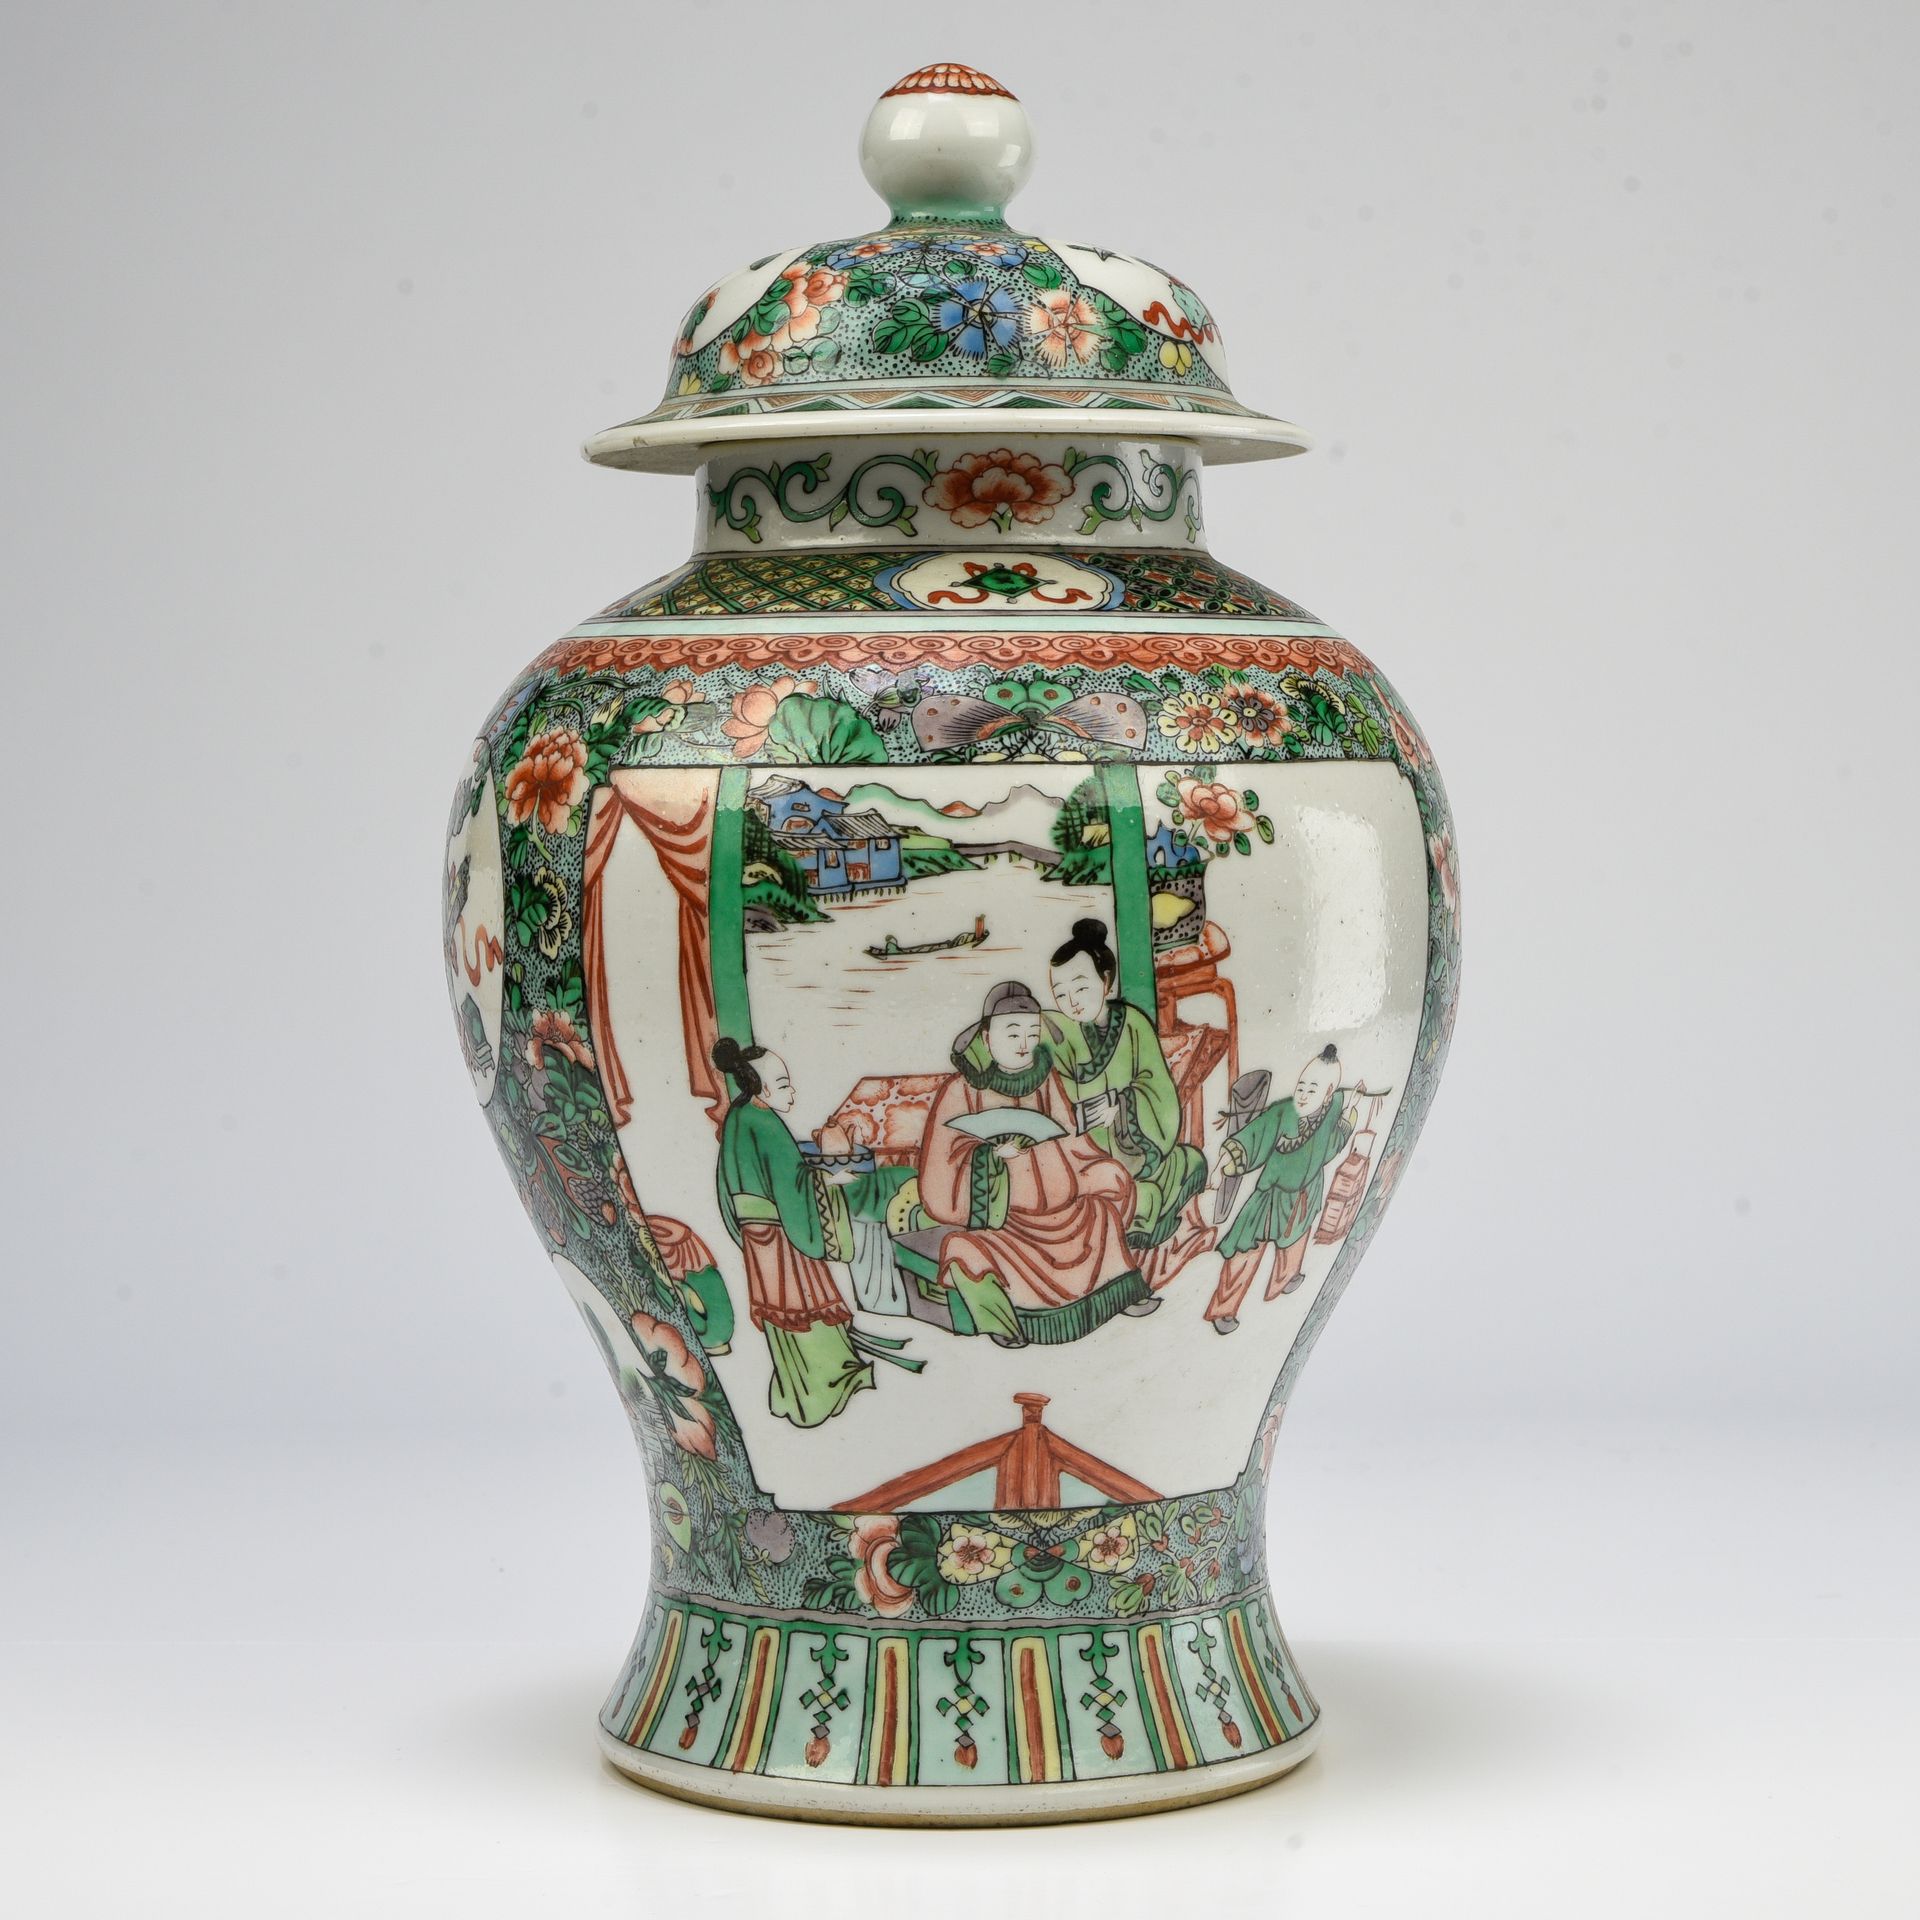 Null Covered potiche vase

CHINA - EARLY 20TH CENTURY

Polychrome-enamelled porc&hellip;